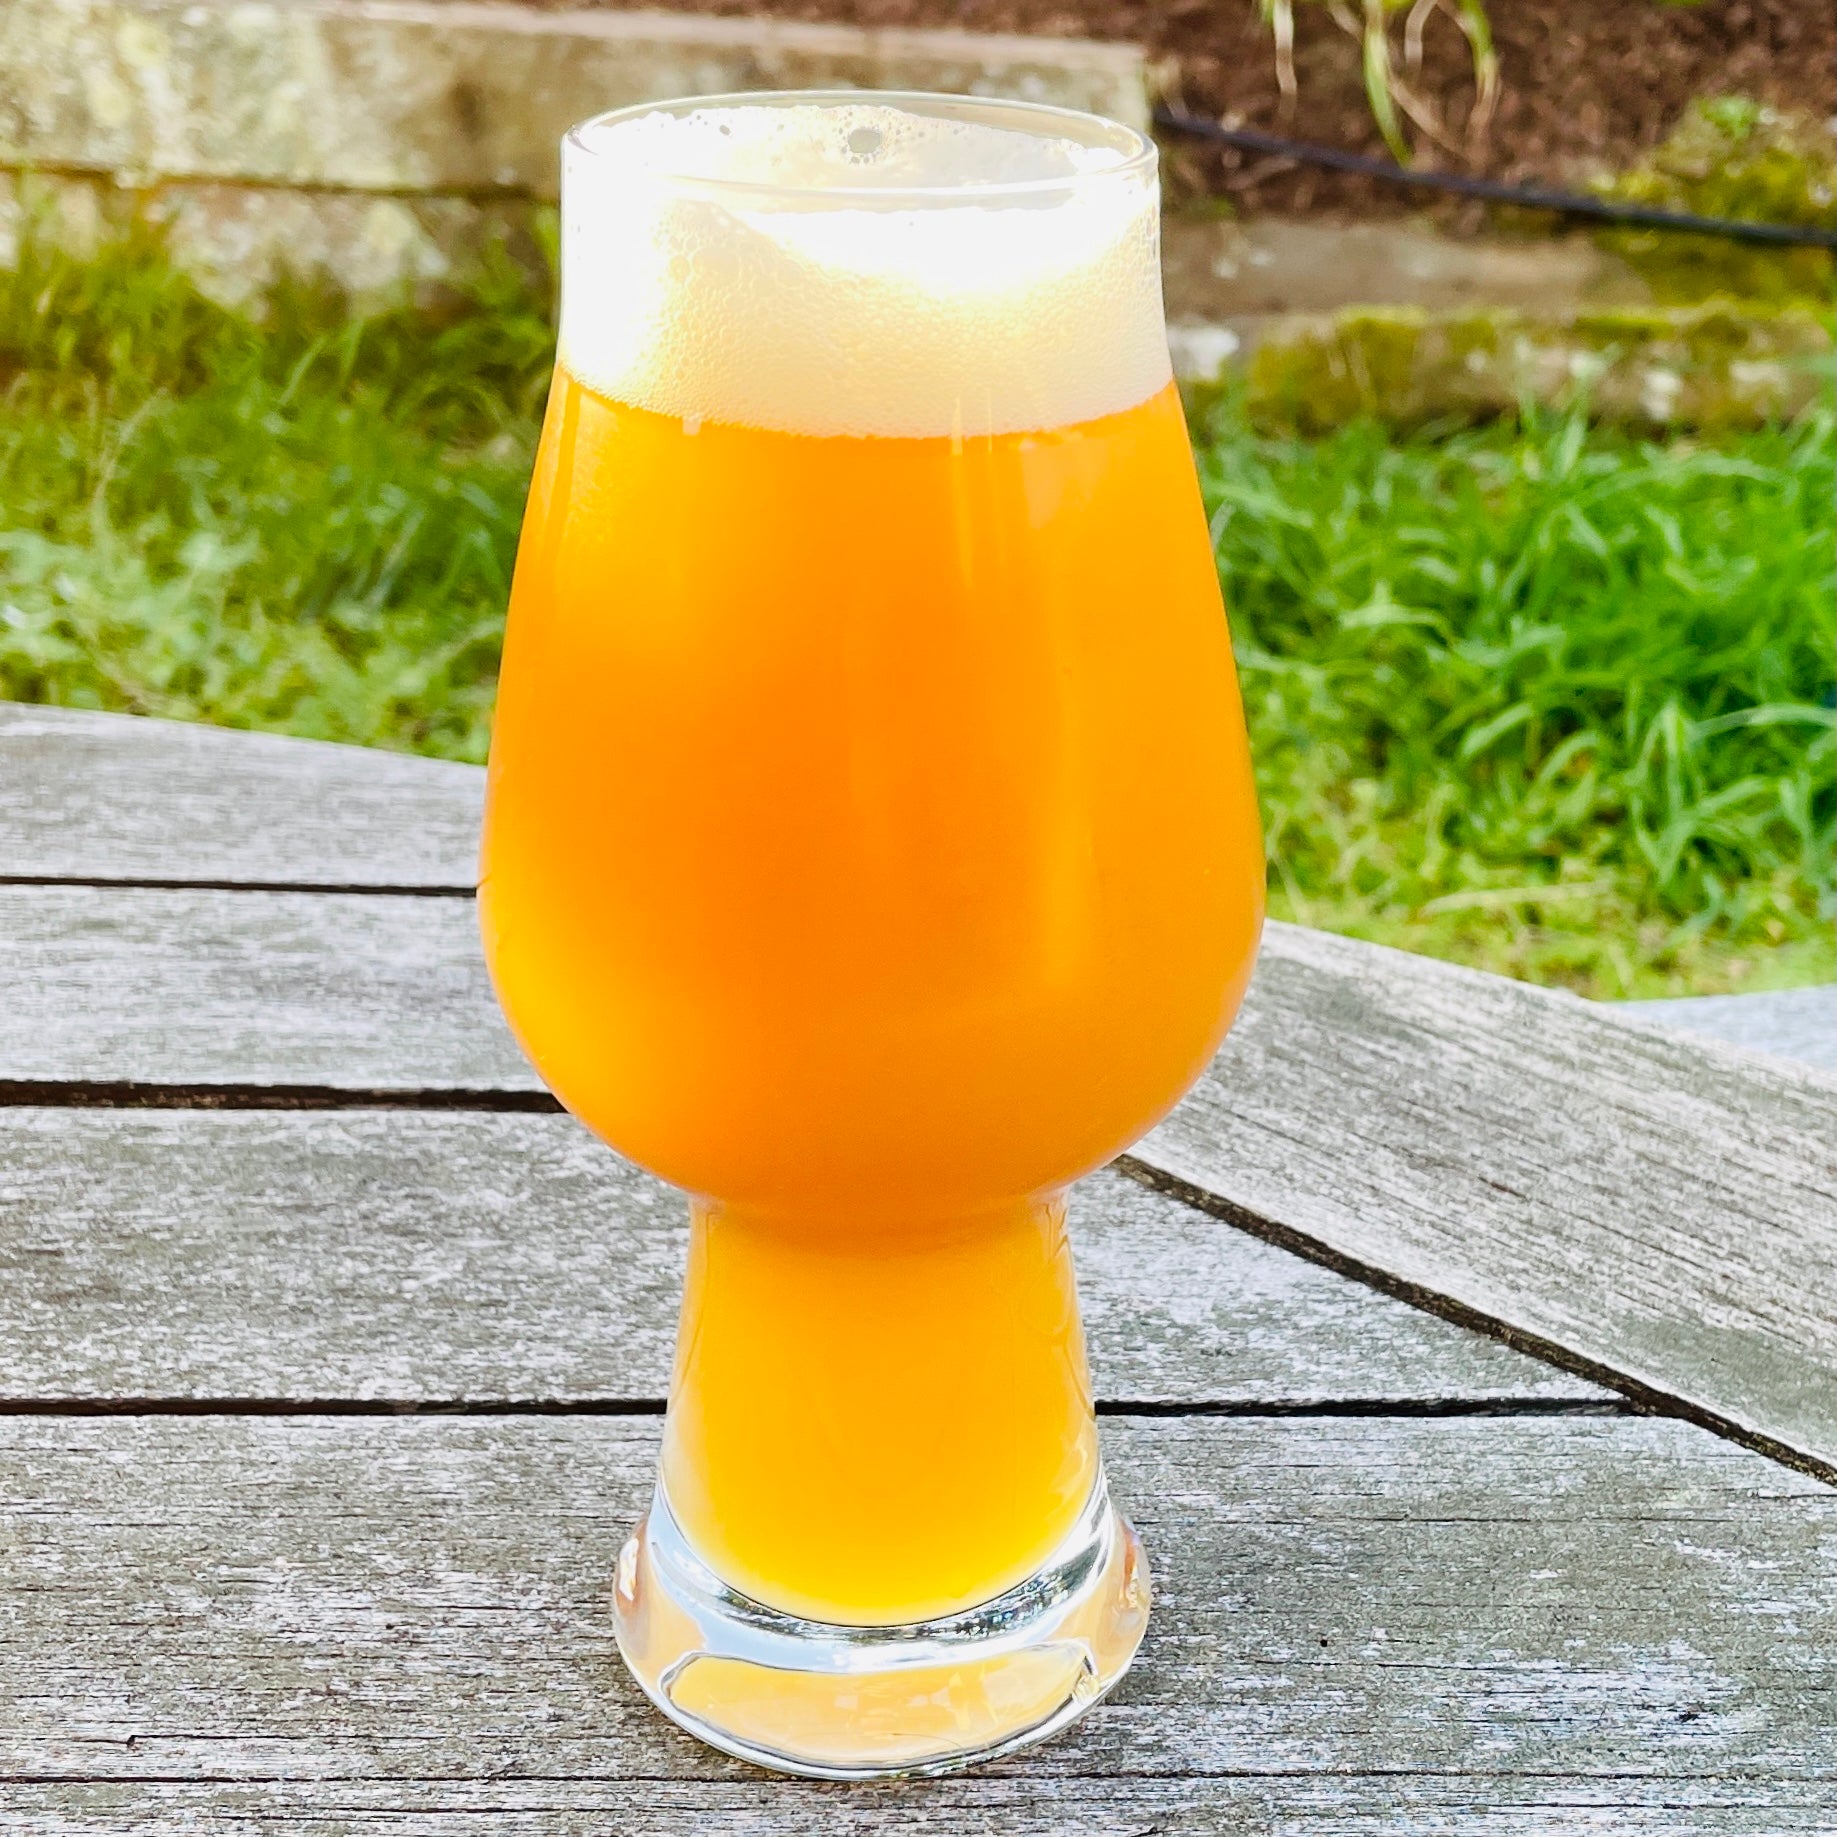 ATF Wicked Weed (IIPA) - All Things Fermented | Home Brew Shop NZ | Supplies | Equipment